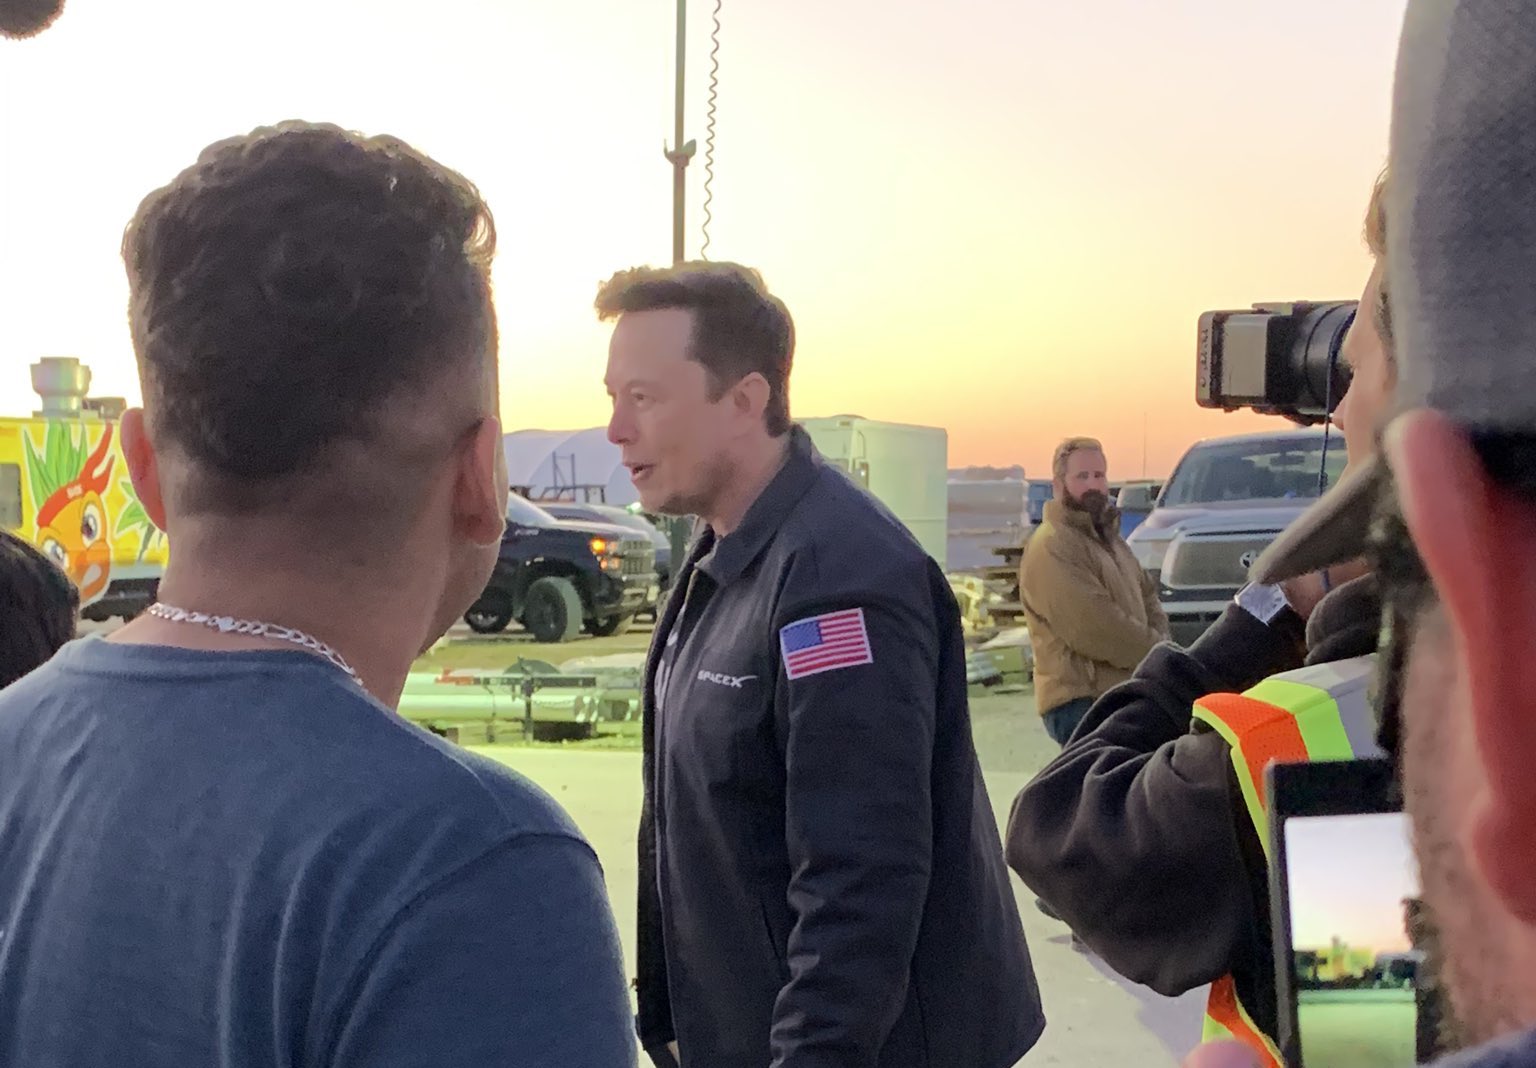 SpaceX CEO Elon Musk greets Starship Career Day hopefuls at festive event